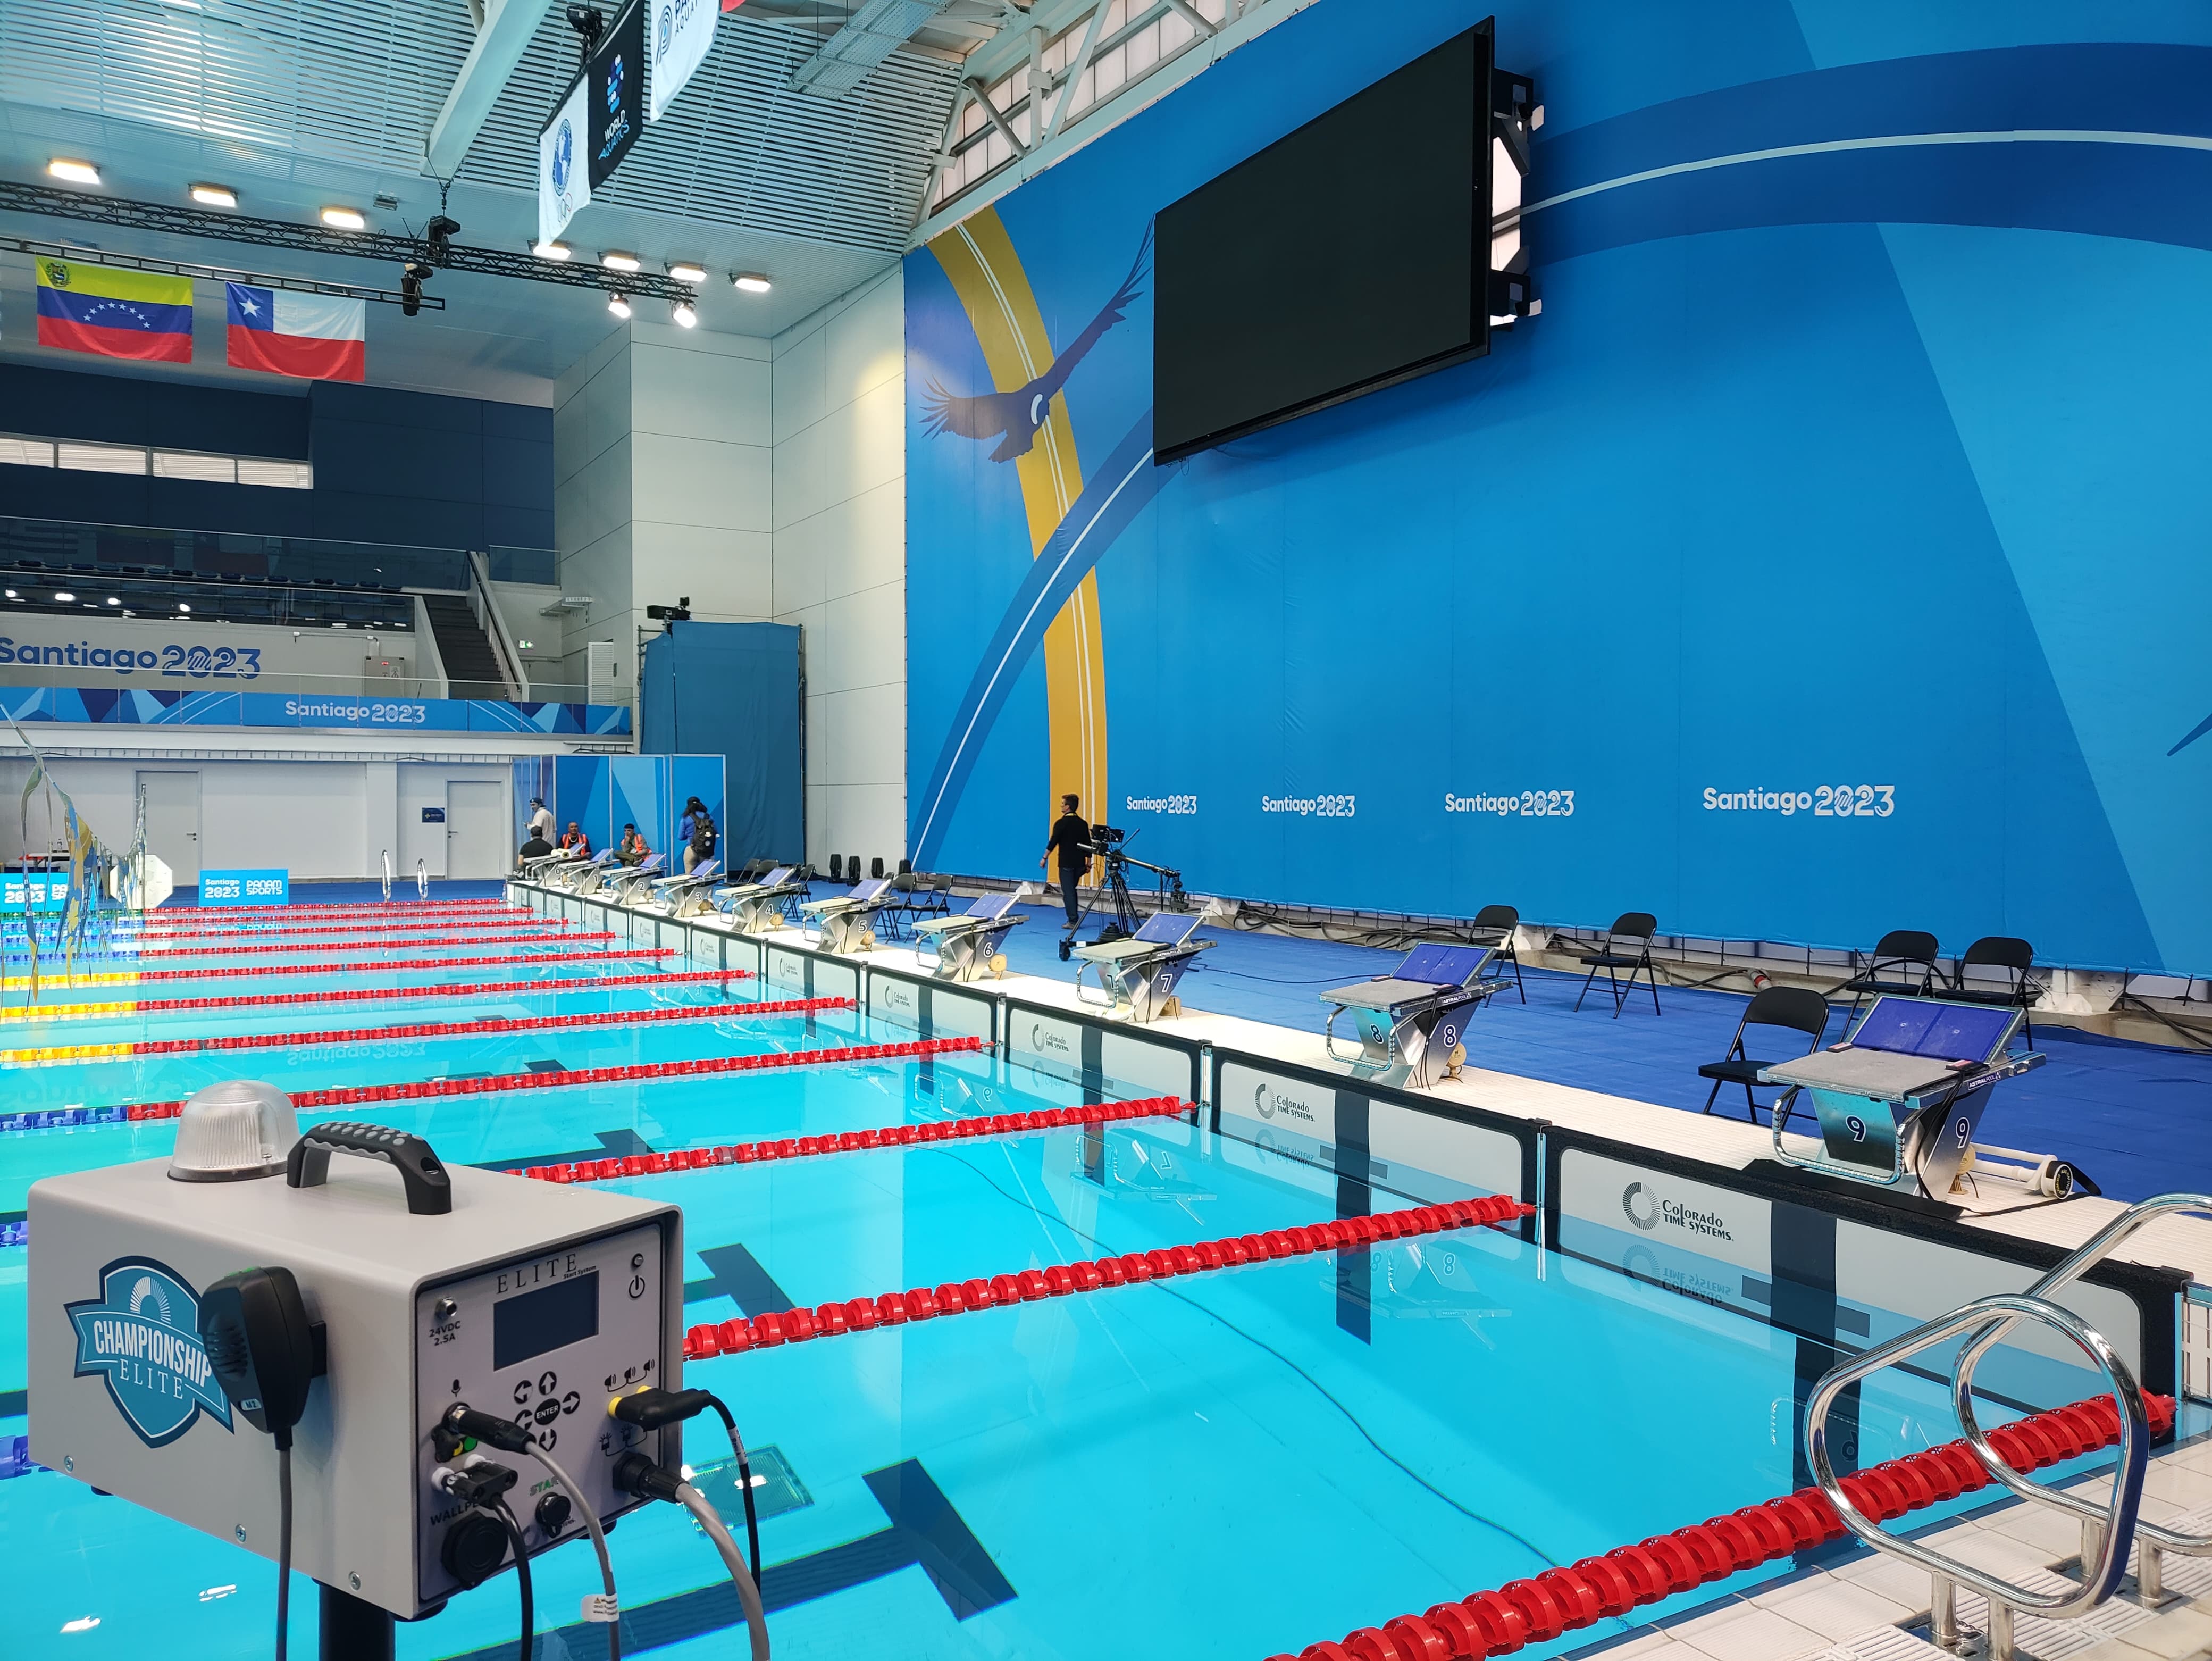 The Championship Elite Swimming Start System at an indoor competitive swimming pool